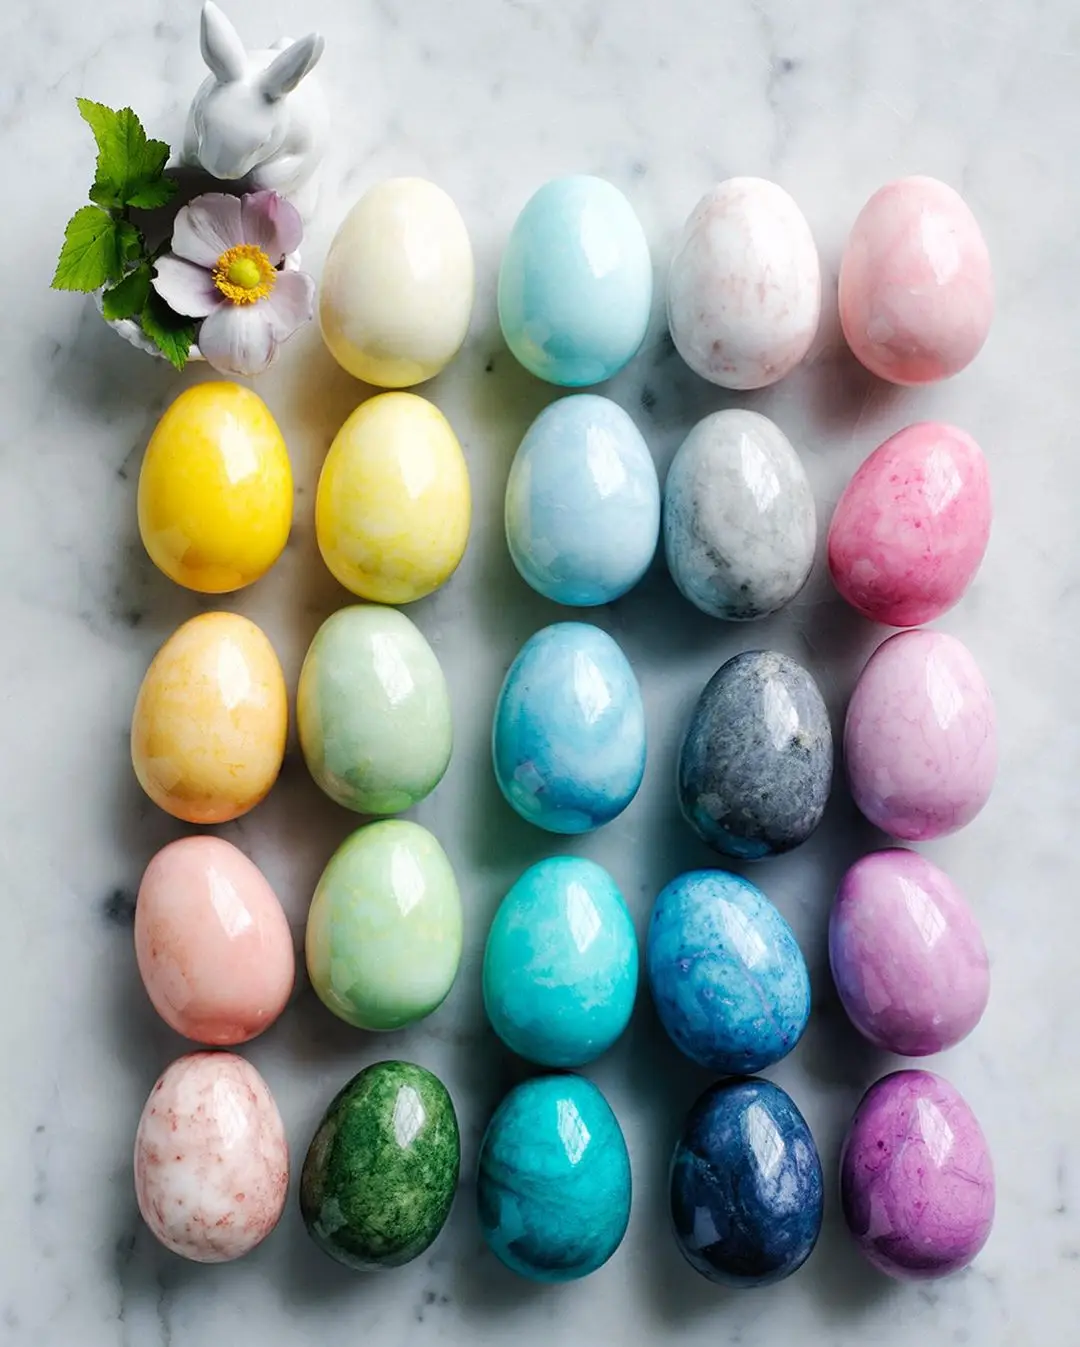 8 Unusual Facts about Easter Celebrations That Will Surprise You ...